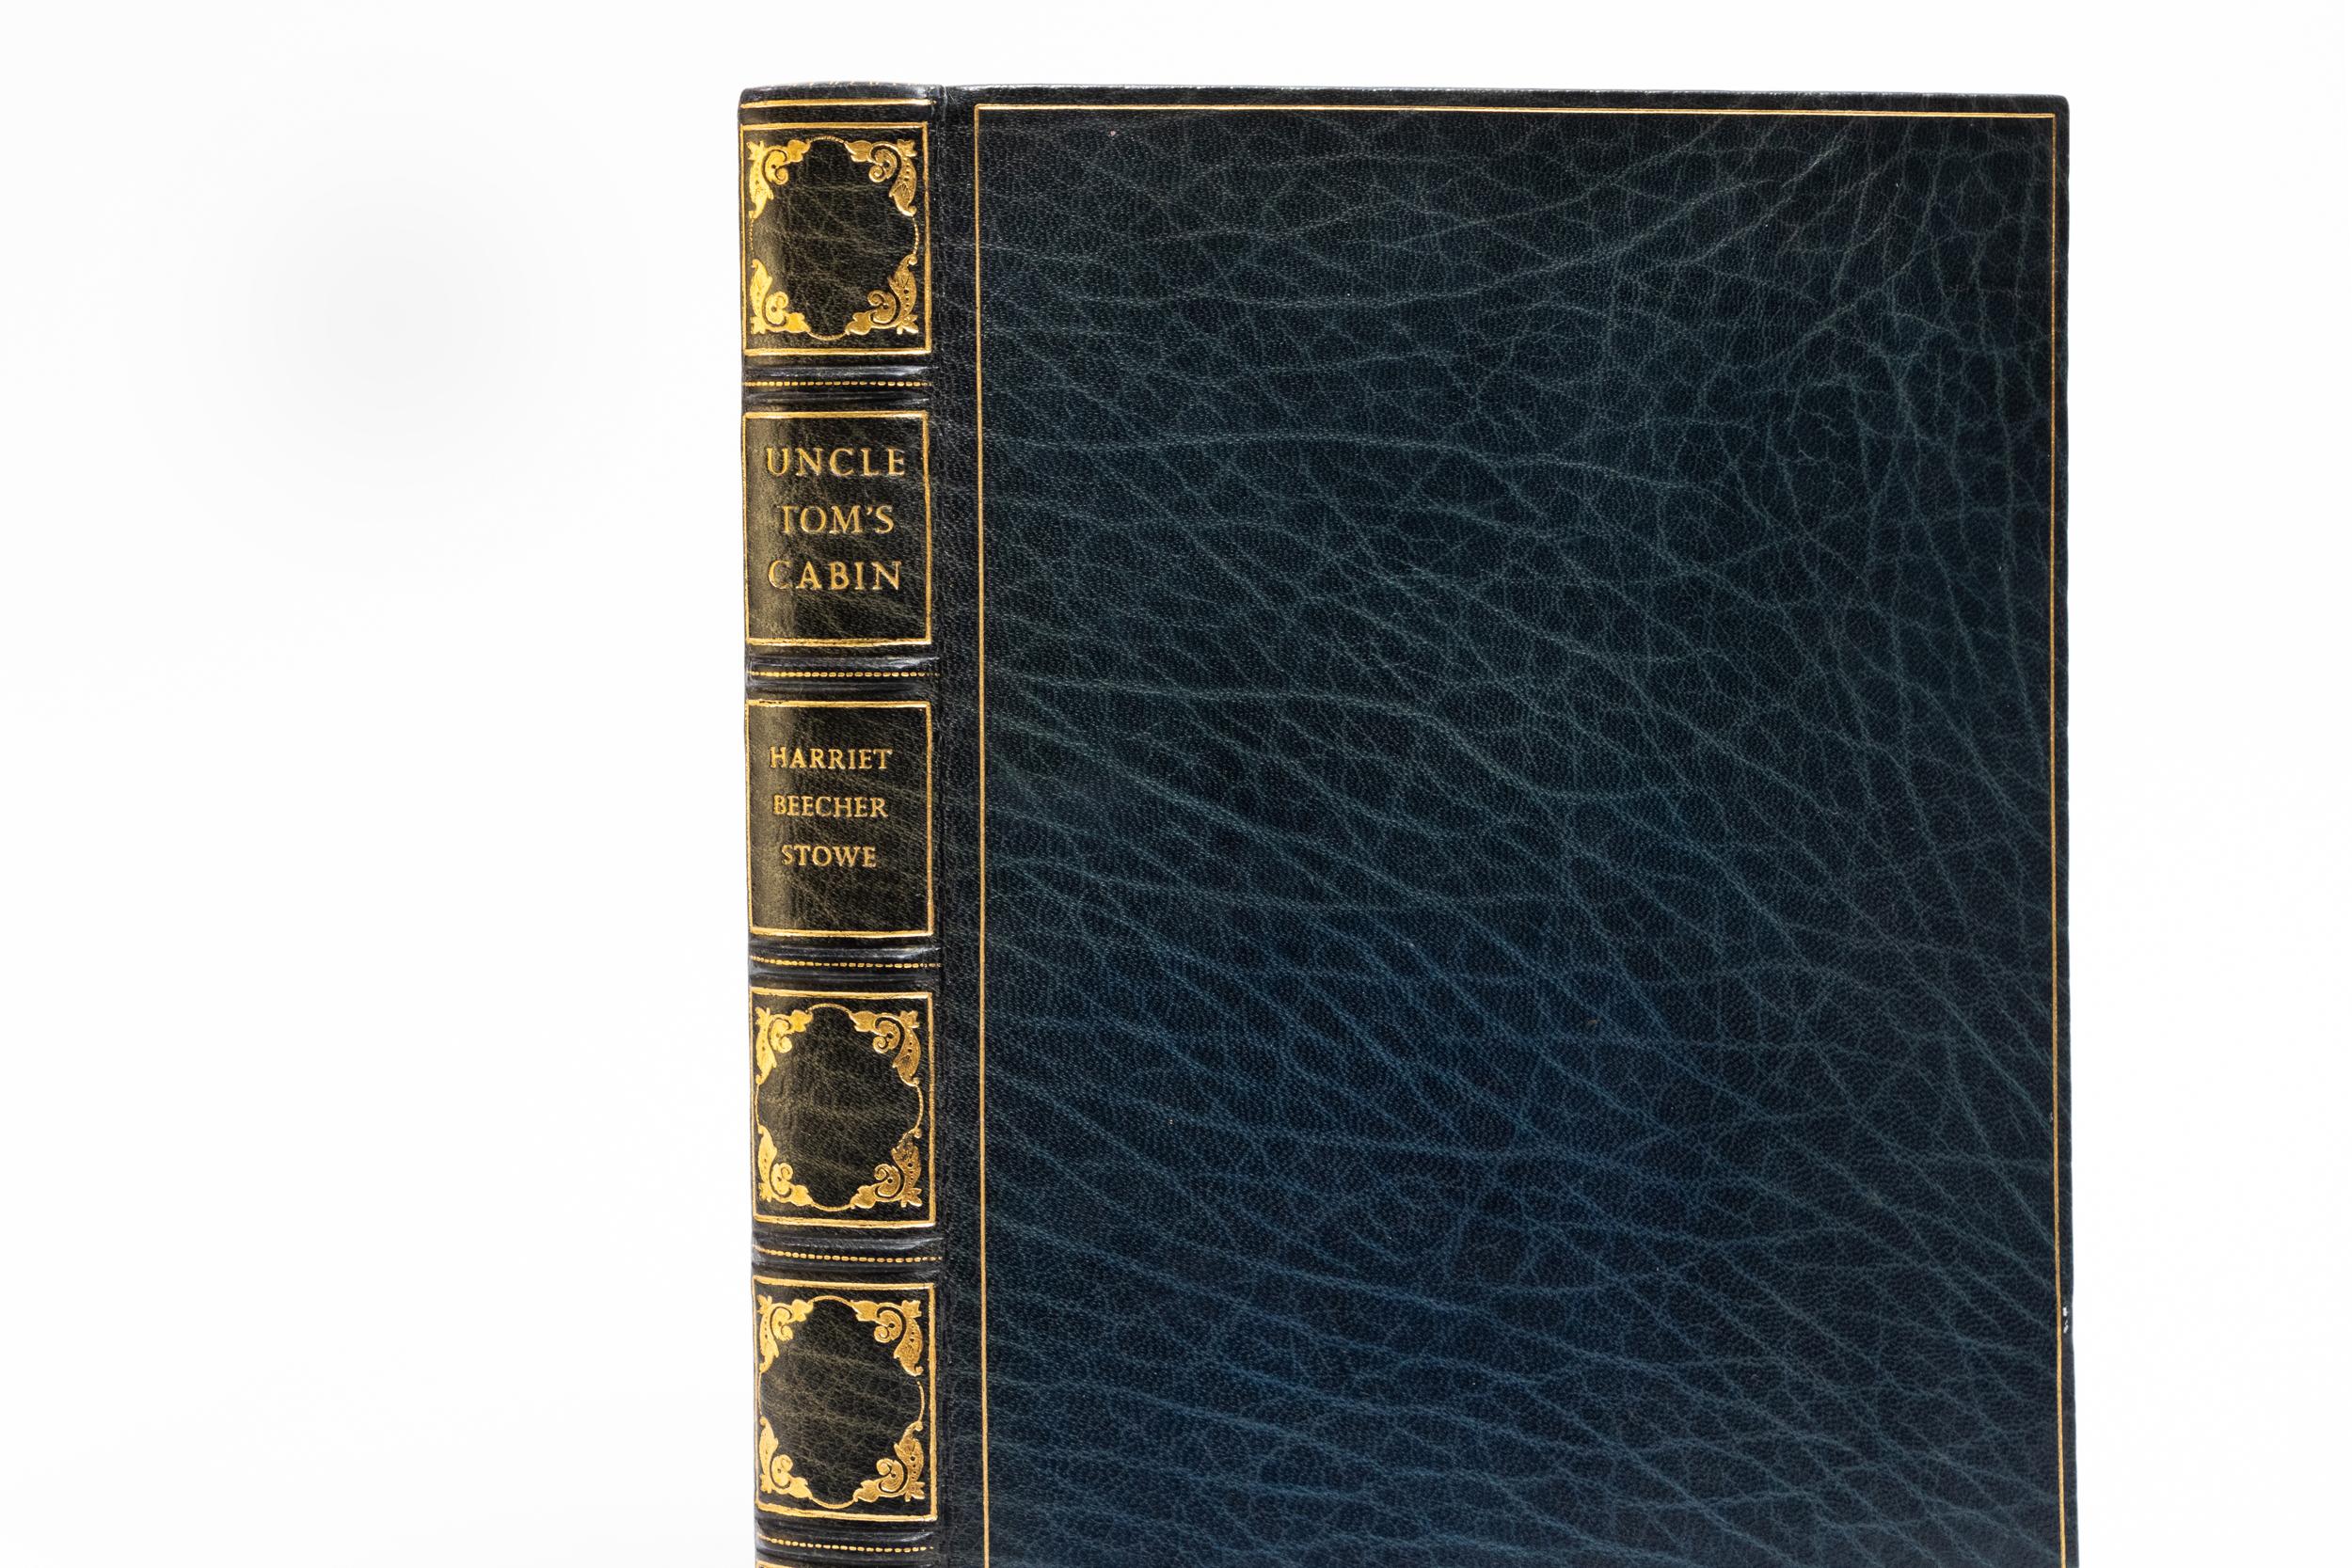 1 Volume. Harriet Beecher Stowe, Uncle Tom's Cabin. Bound in full blue morocco. Raised bands. All edges gilt. Decorative gilt tooling on spines. Marbled endpapers. Bound by Bayntun. Illustrated with 16 lithographs by Miguel Covarrubias. Published: